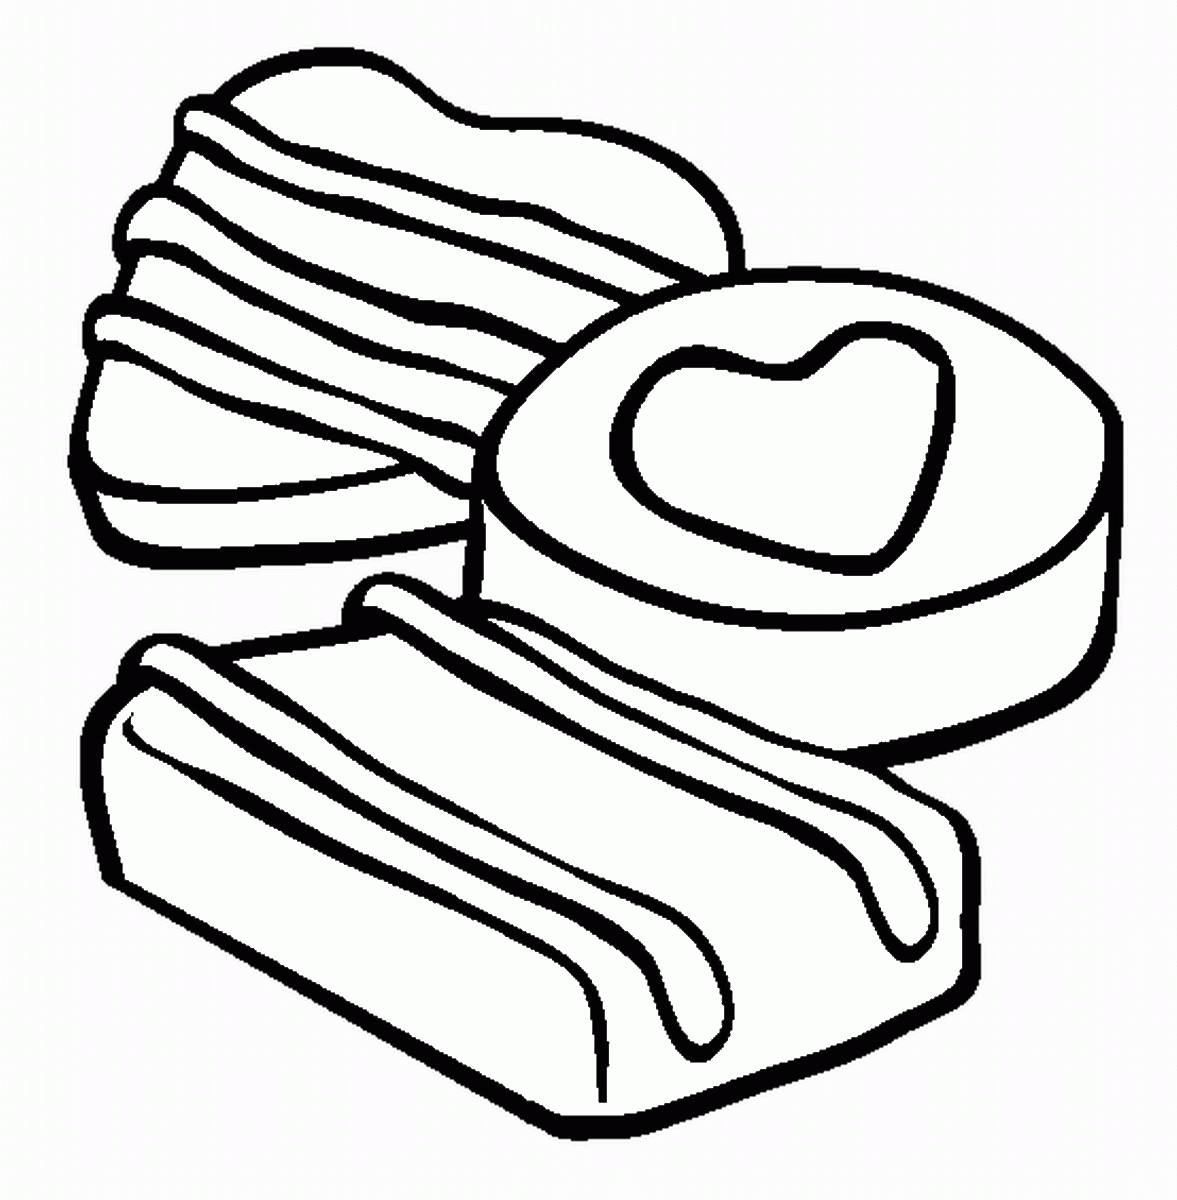 Chocolate Candies Coloring Page